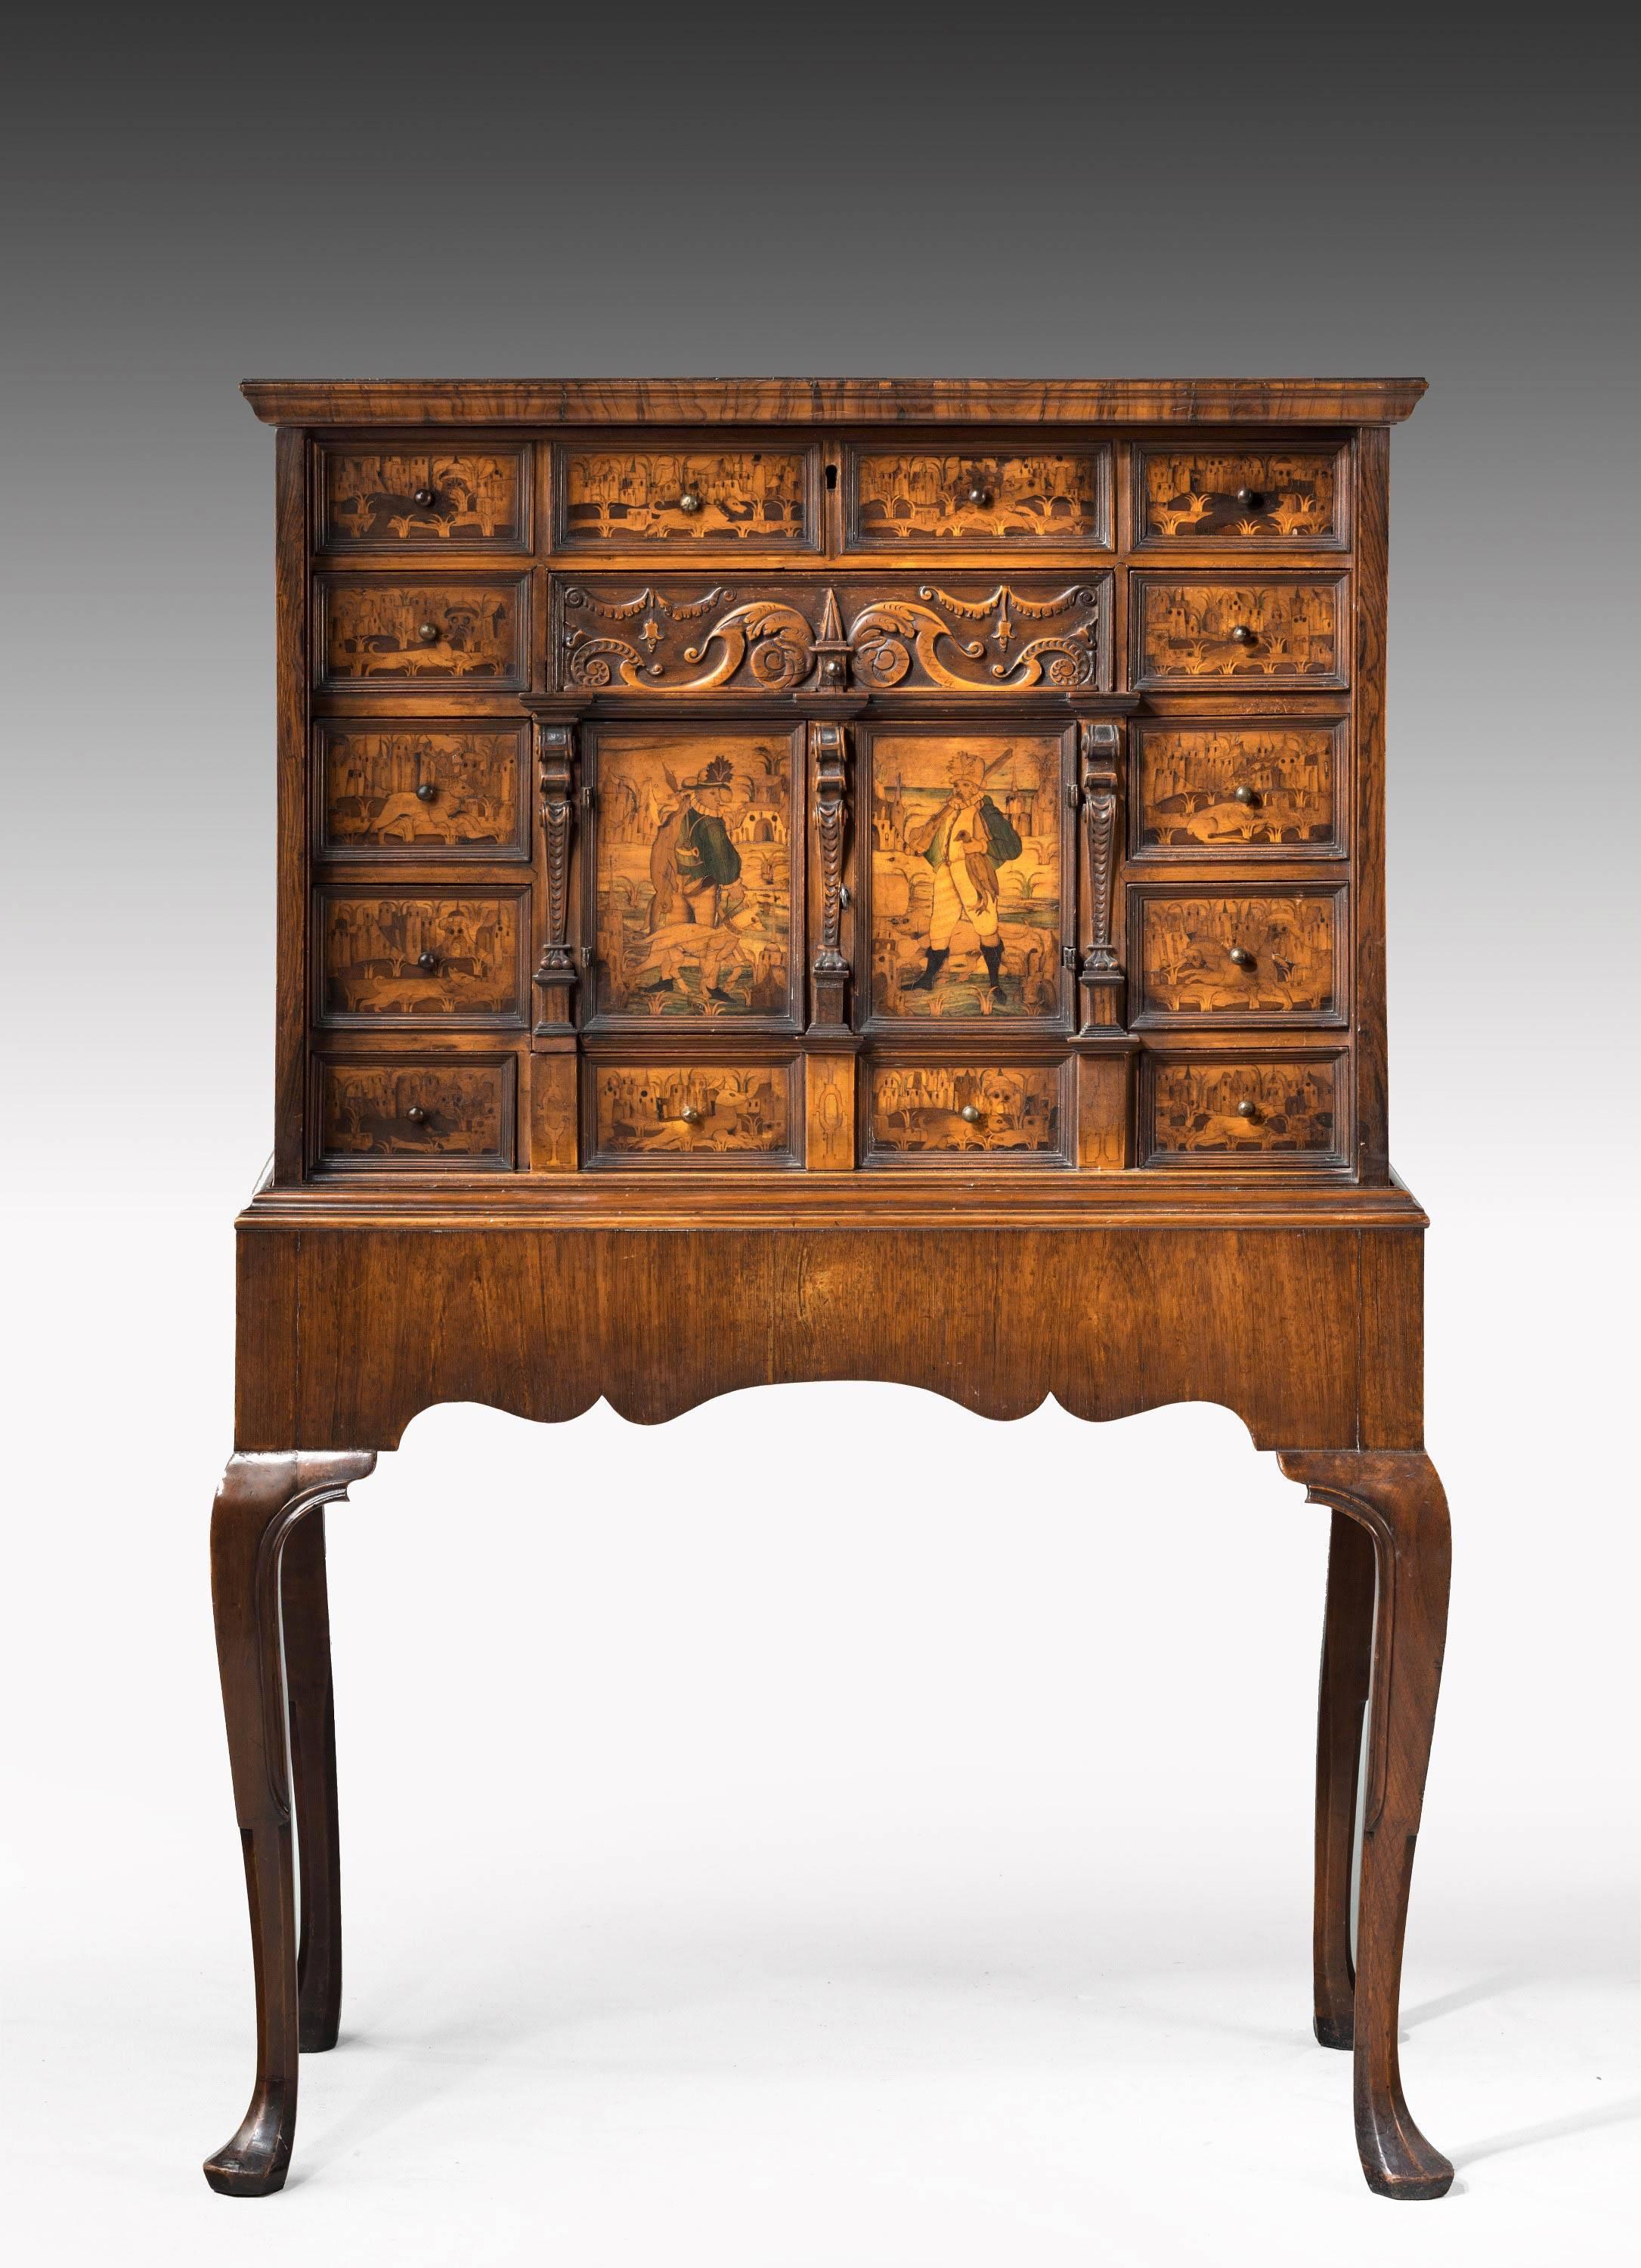 A most unusual continental walnut cabinet on stand of very elaborate marquetry design. The top beautifully faded in walnut. The façade with exotic scenes and carved detail.